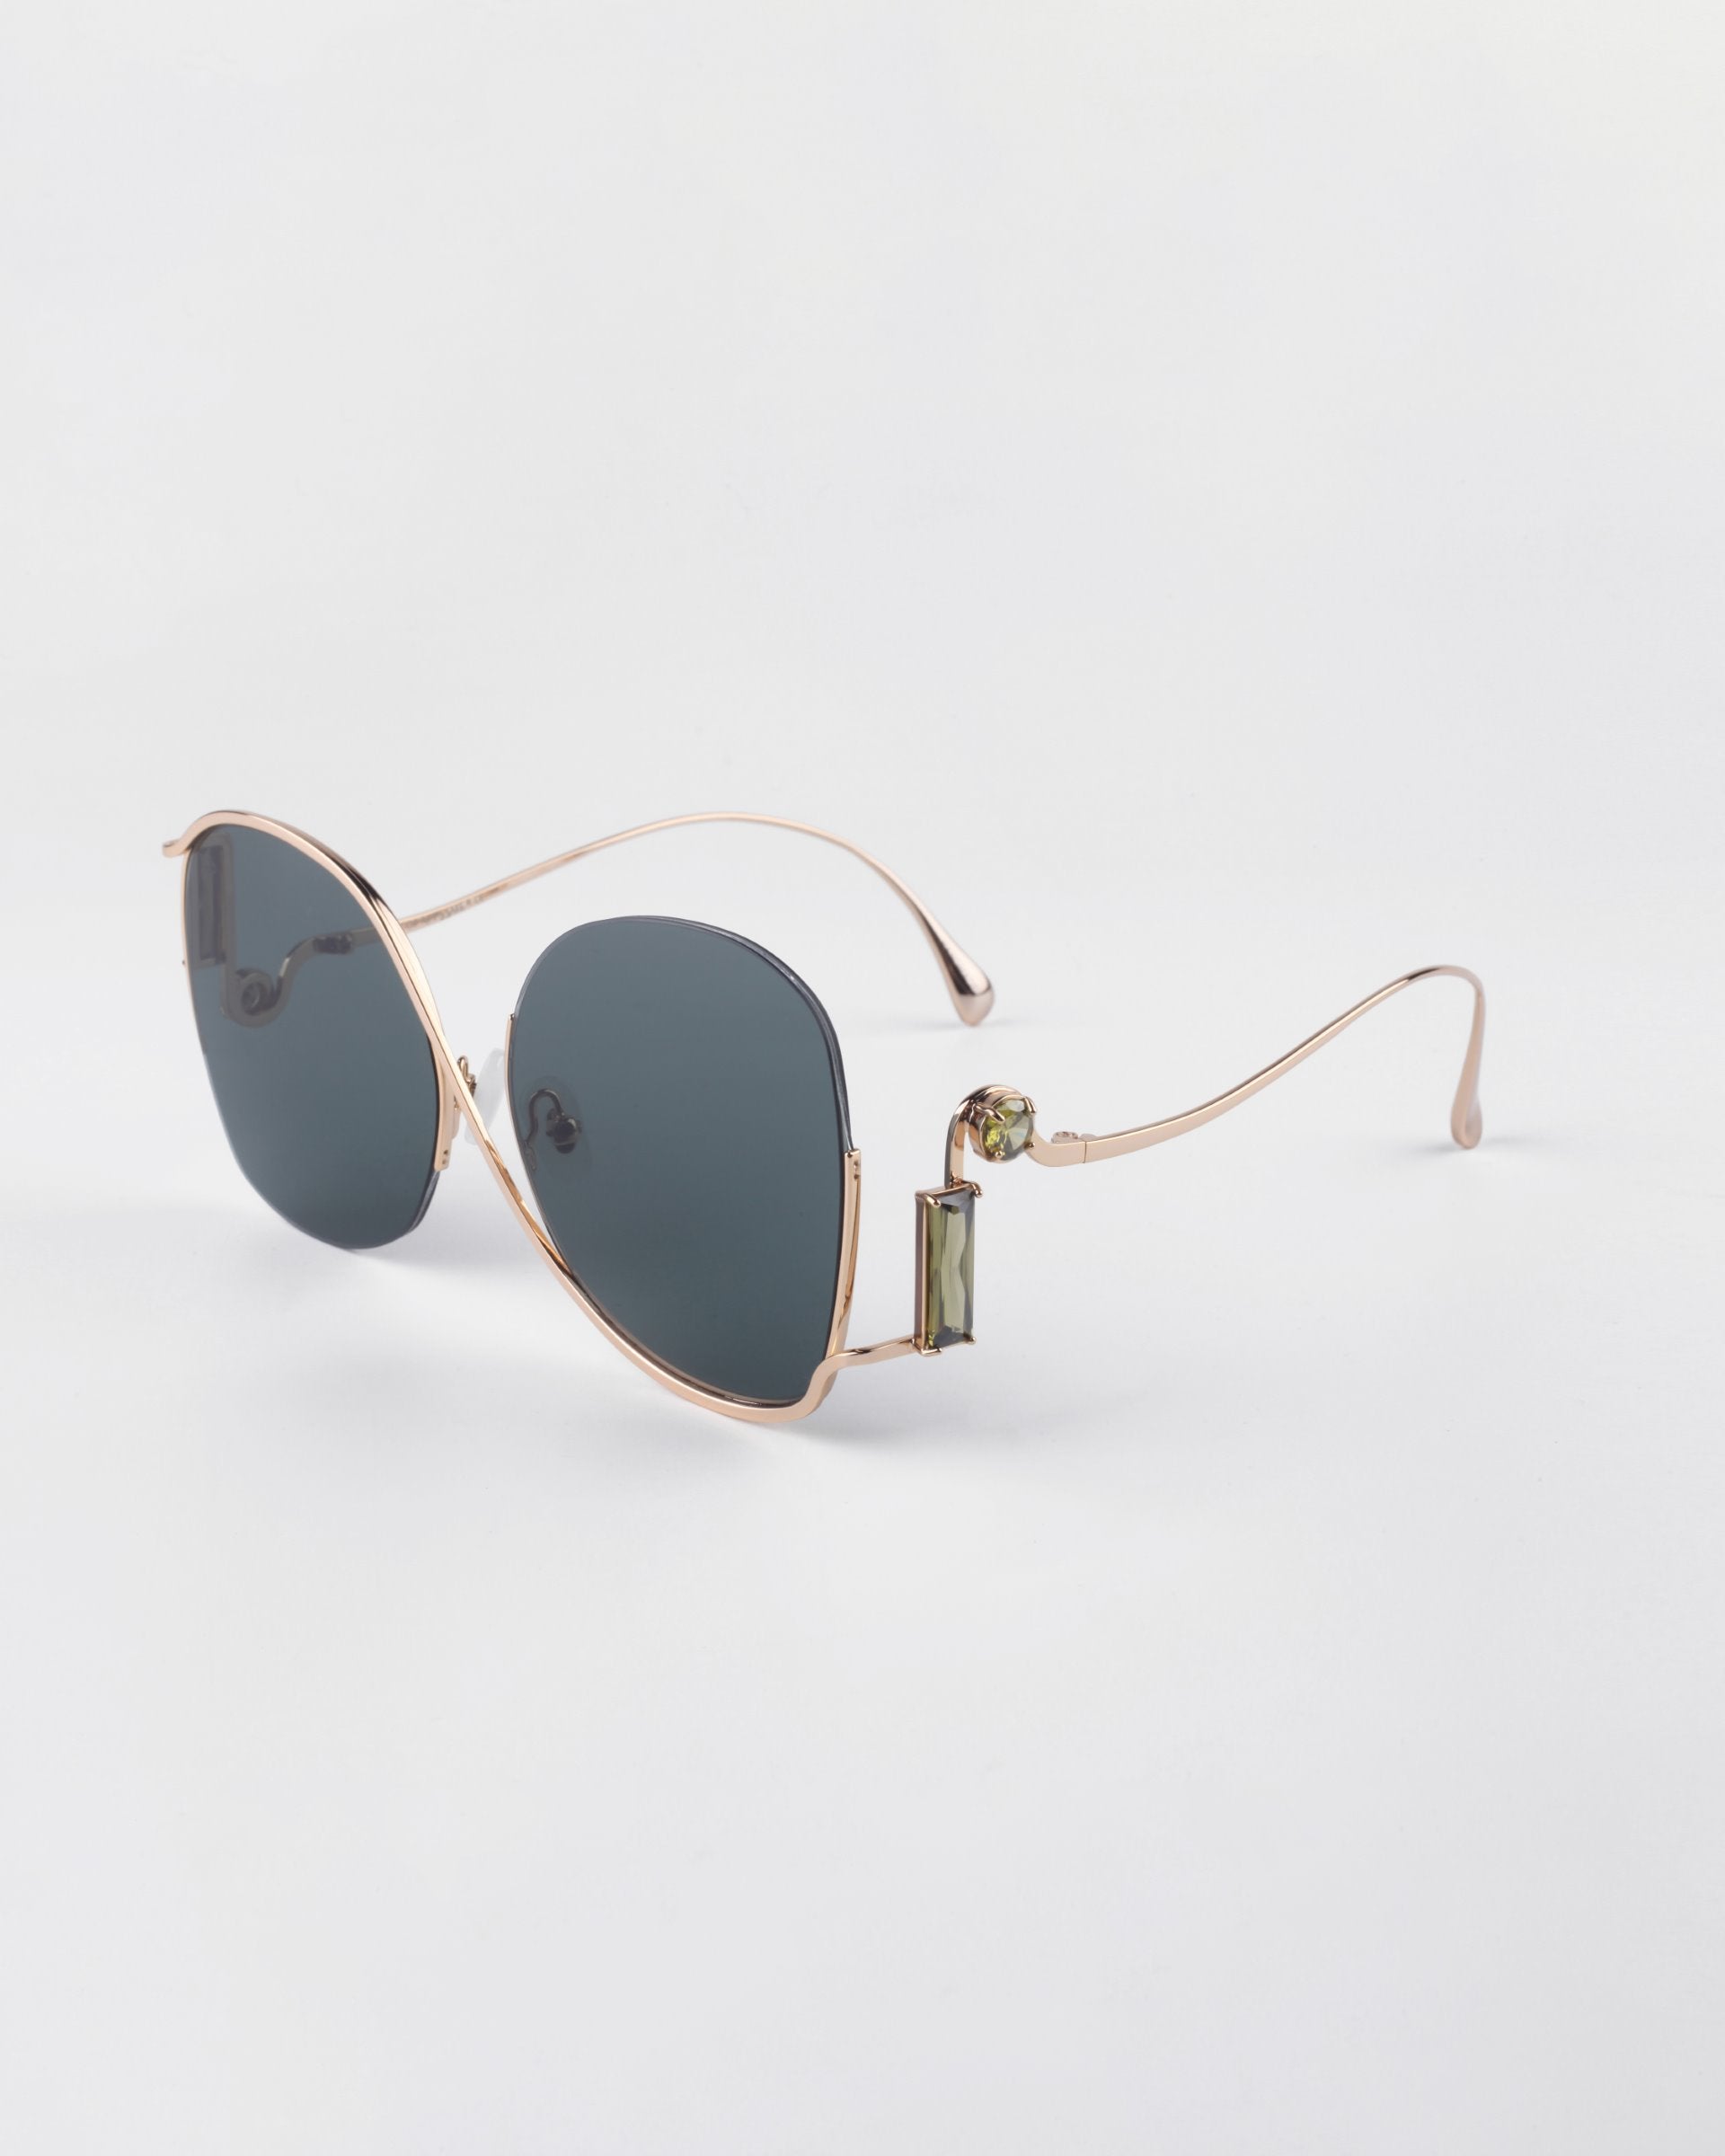 A pair of luxurious sunglasses featuring gold metal frames and dark, UV-protected lenses. The design includes round lenses and thin, curved temple arms with small green decorative details near the hinges. Crystal embellishments add a touch of elegance against a plain white background. These are the Sapphire sunglasses by For Art&#39;s Sake®.